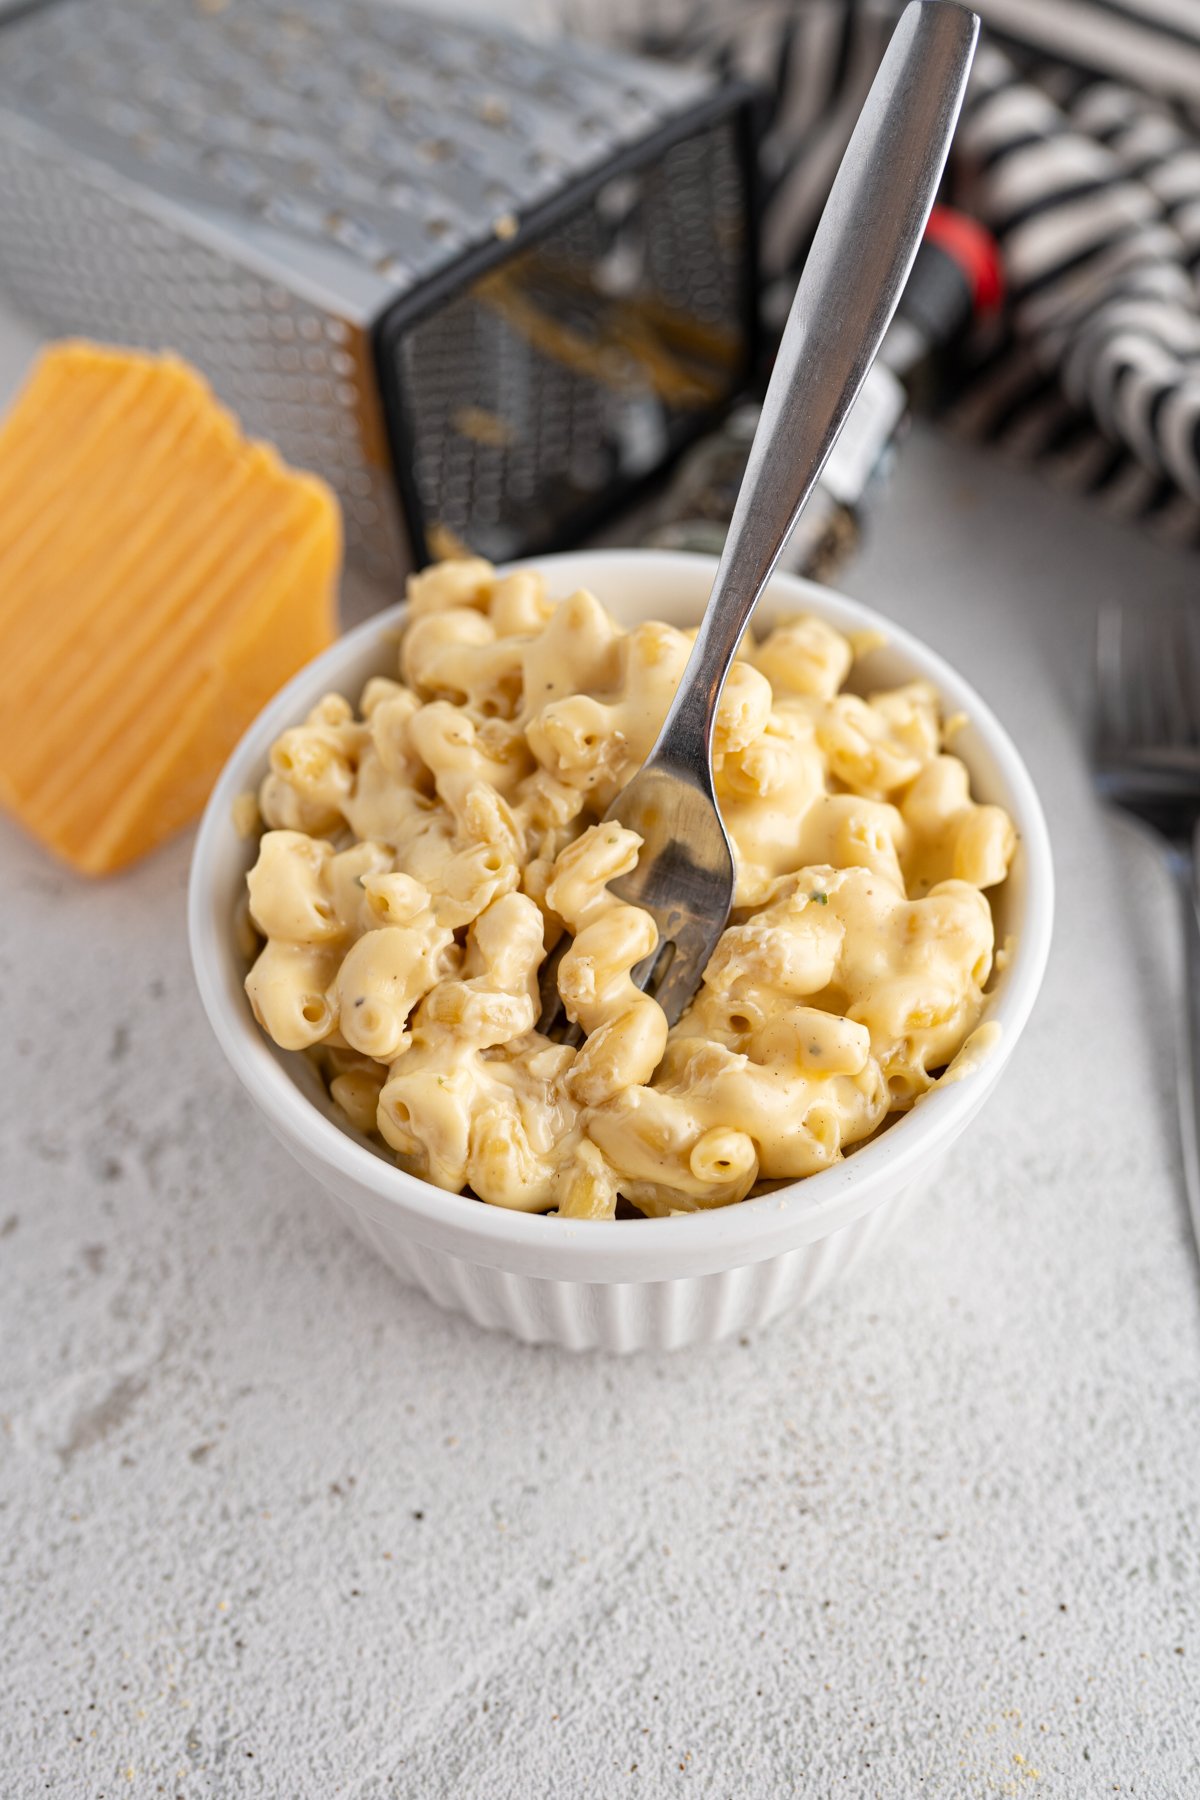 A fork scooping a bite of baked mac n cheese out of a bowl.